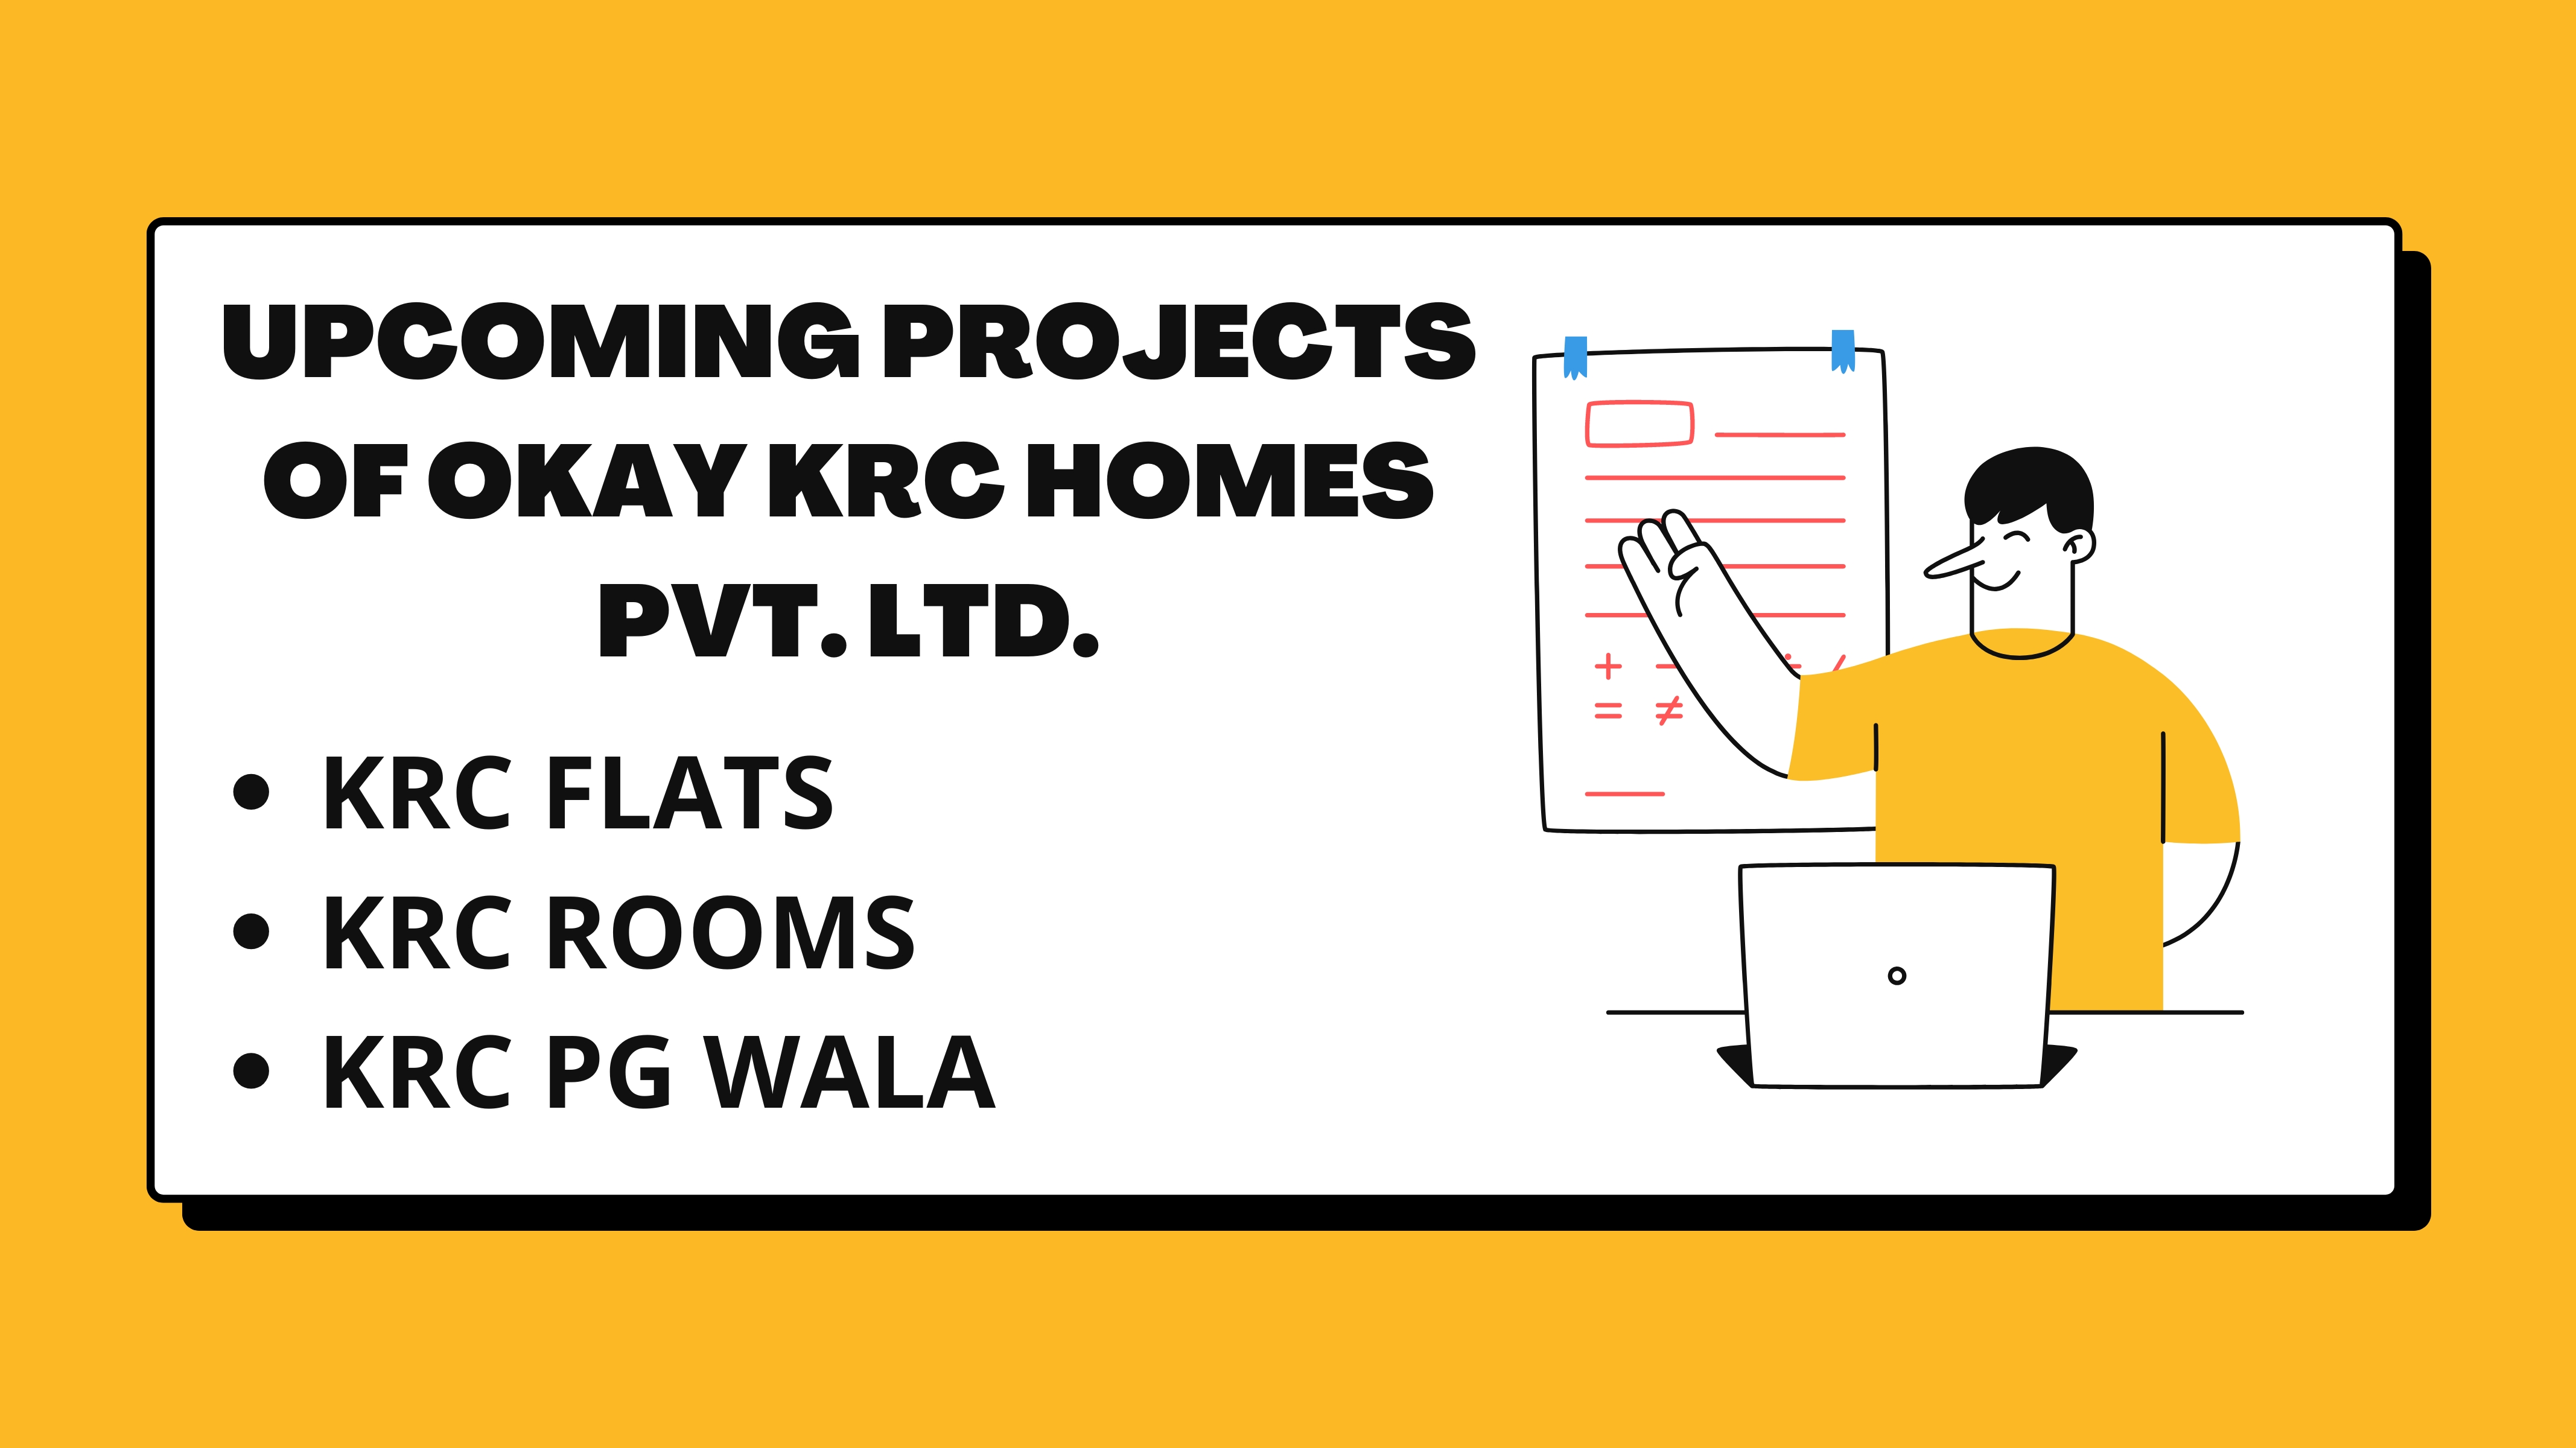 UPCOMING PROJECTS OF OKAY KRC HOMES PVT. LTD.